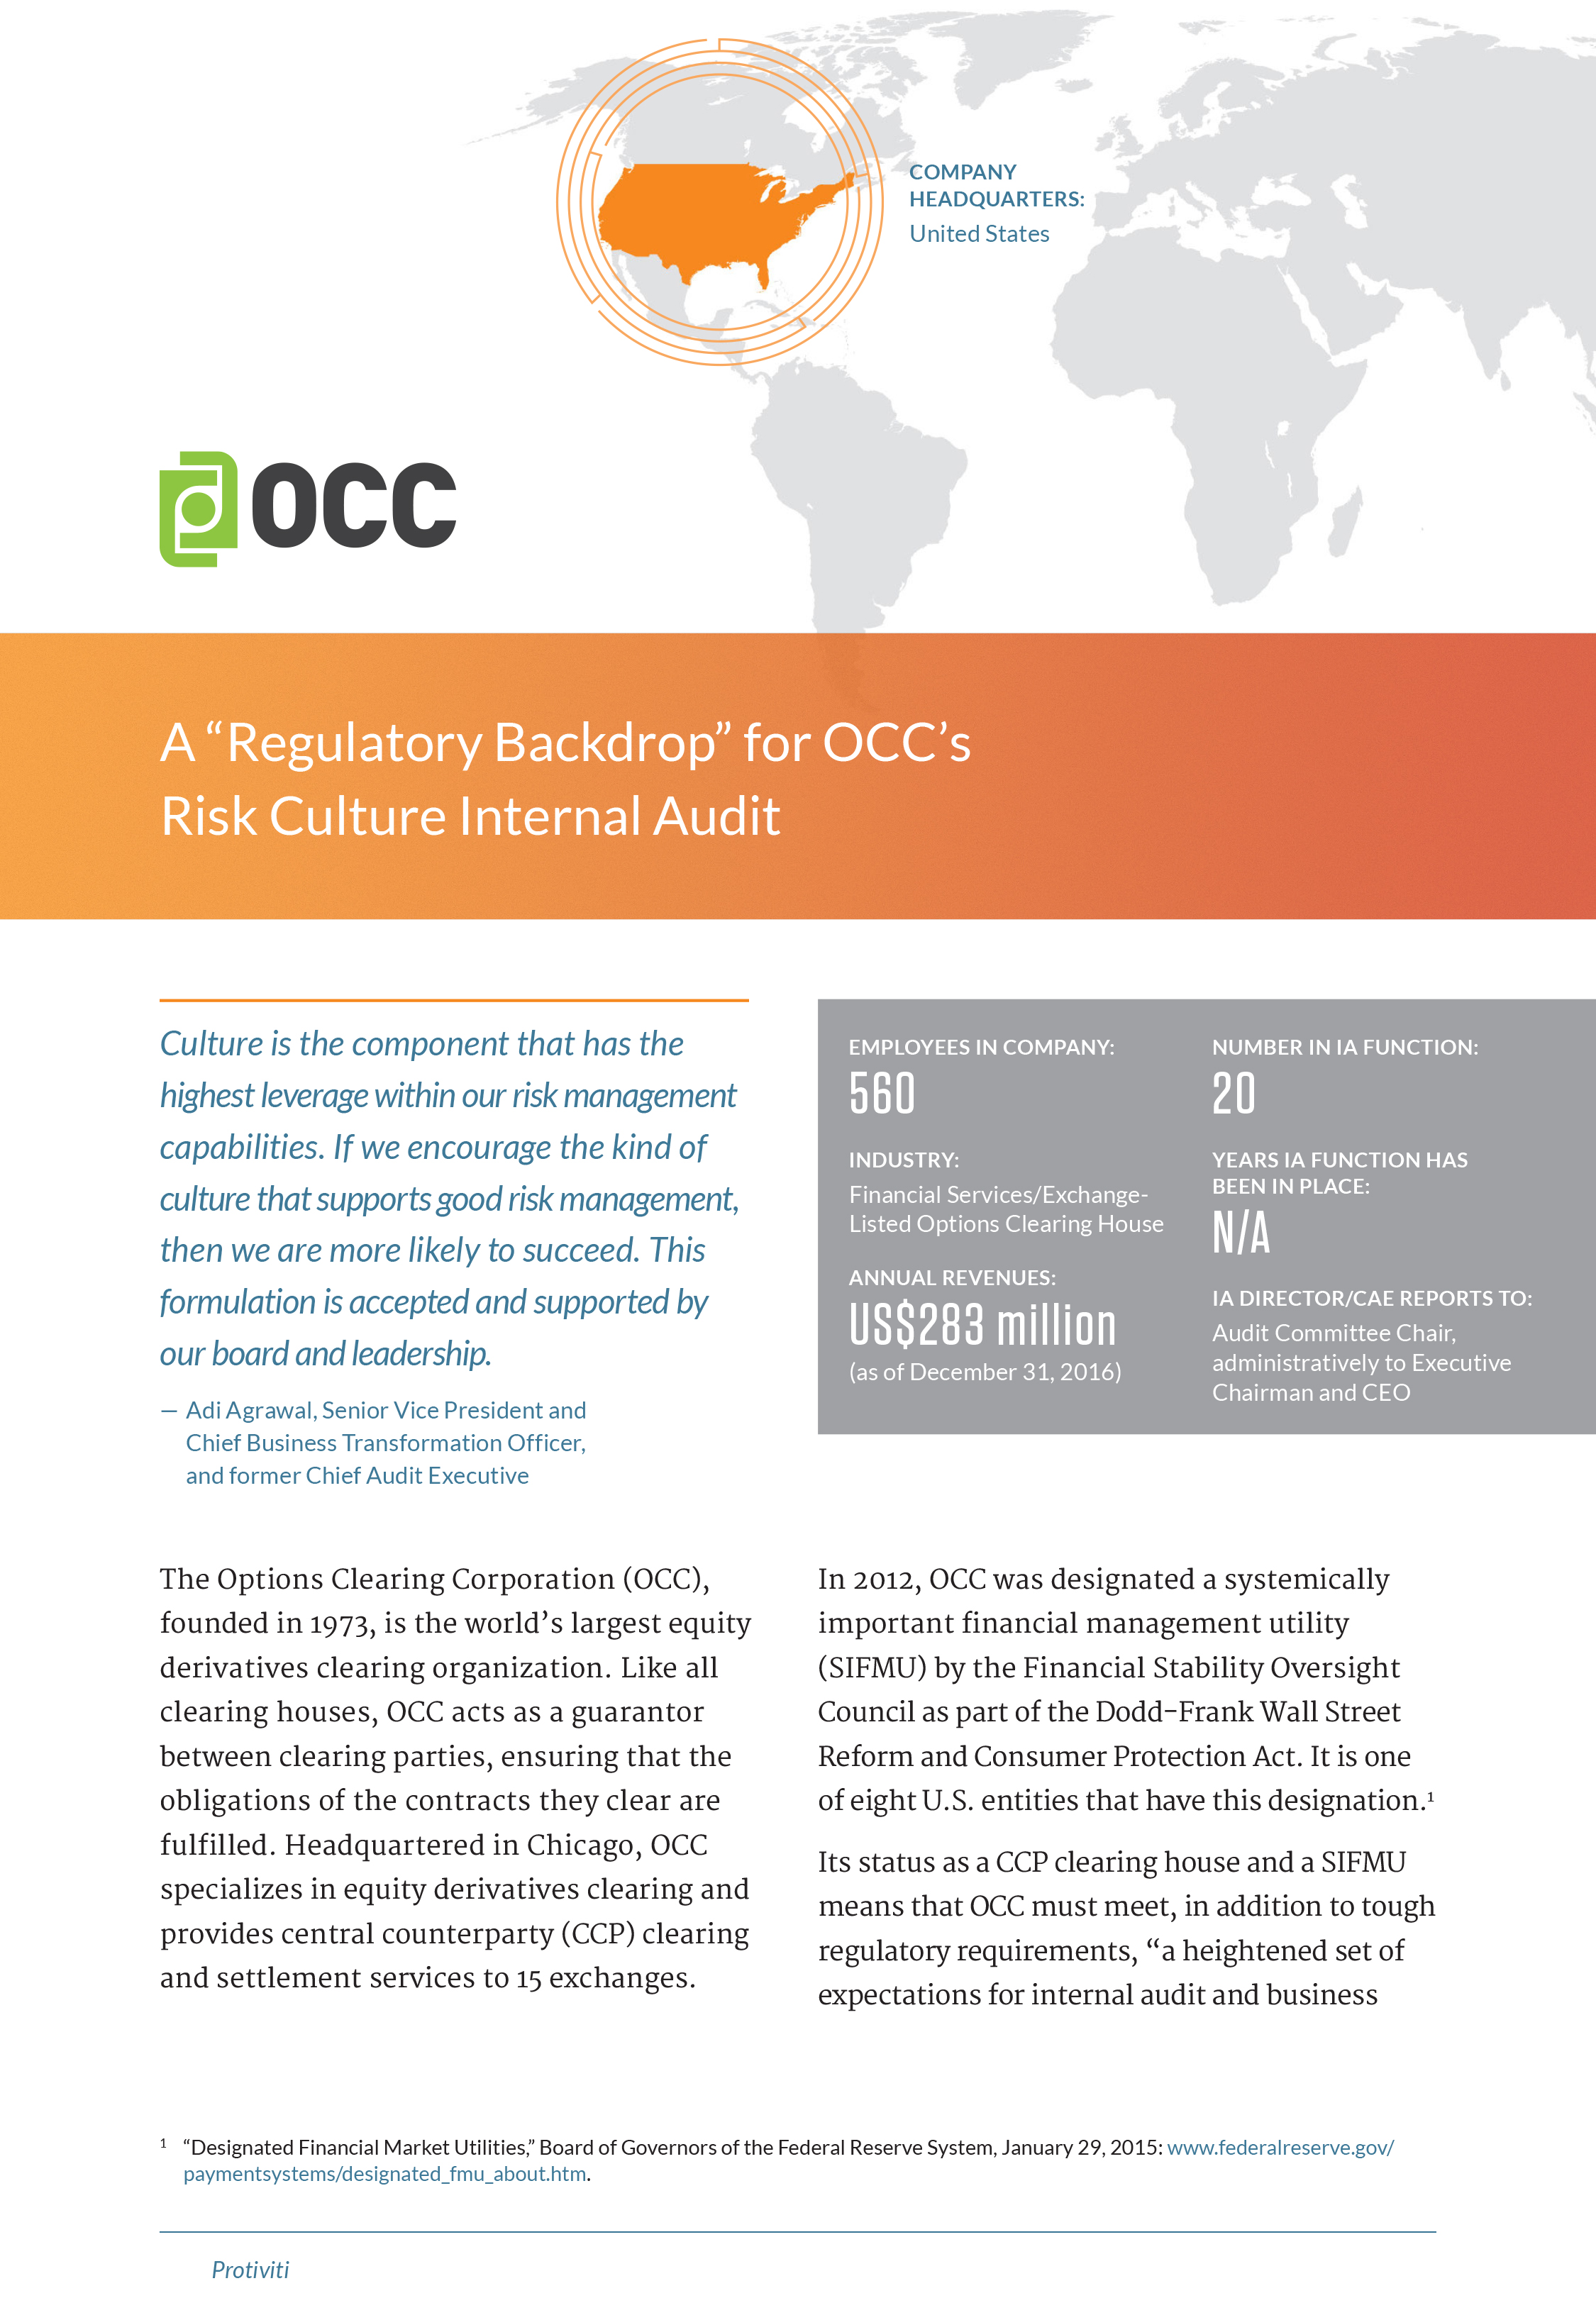 Screenshot of the first page of A “Regulatory Backdrop” for OCC’s Risk Culture Internal Audit